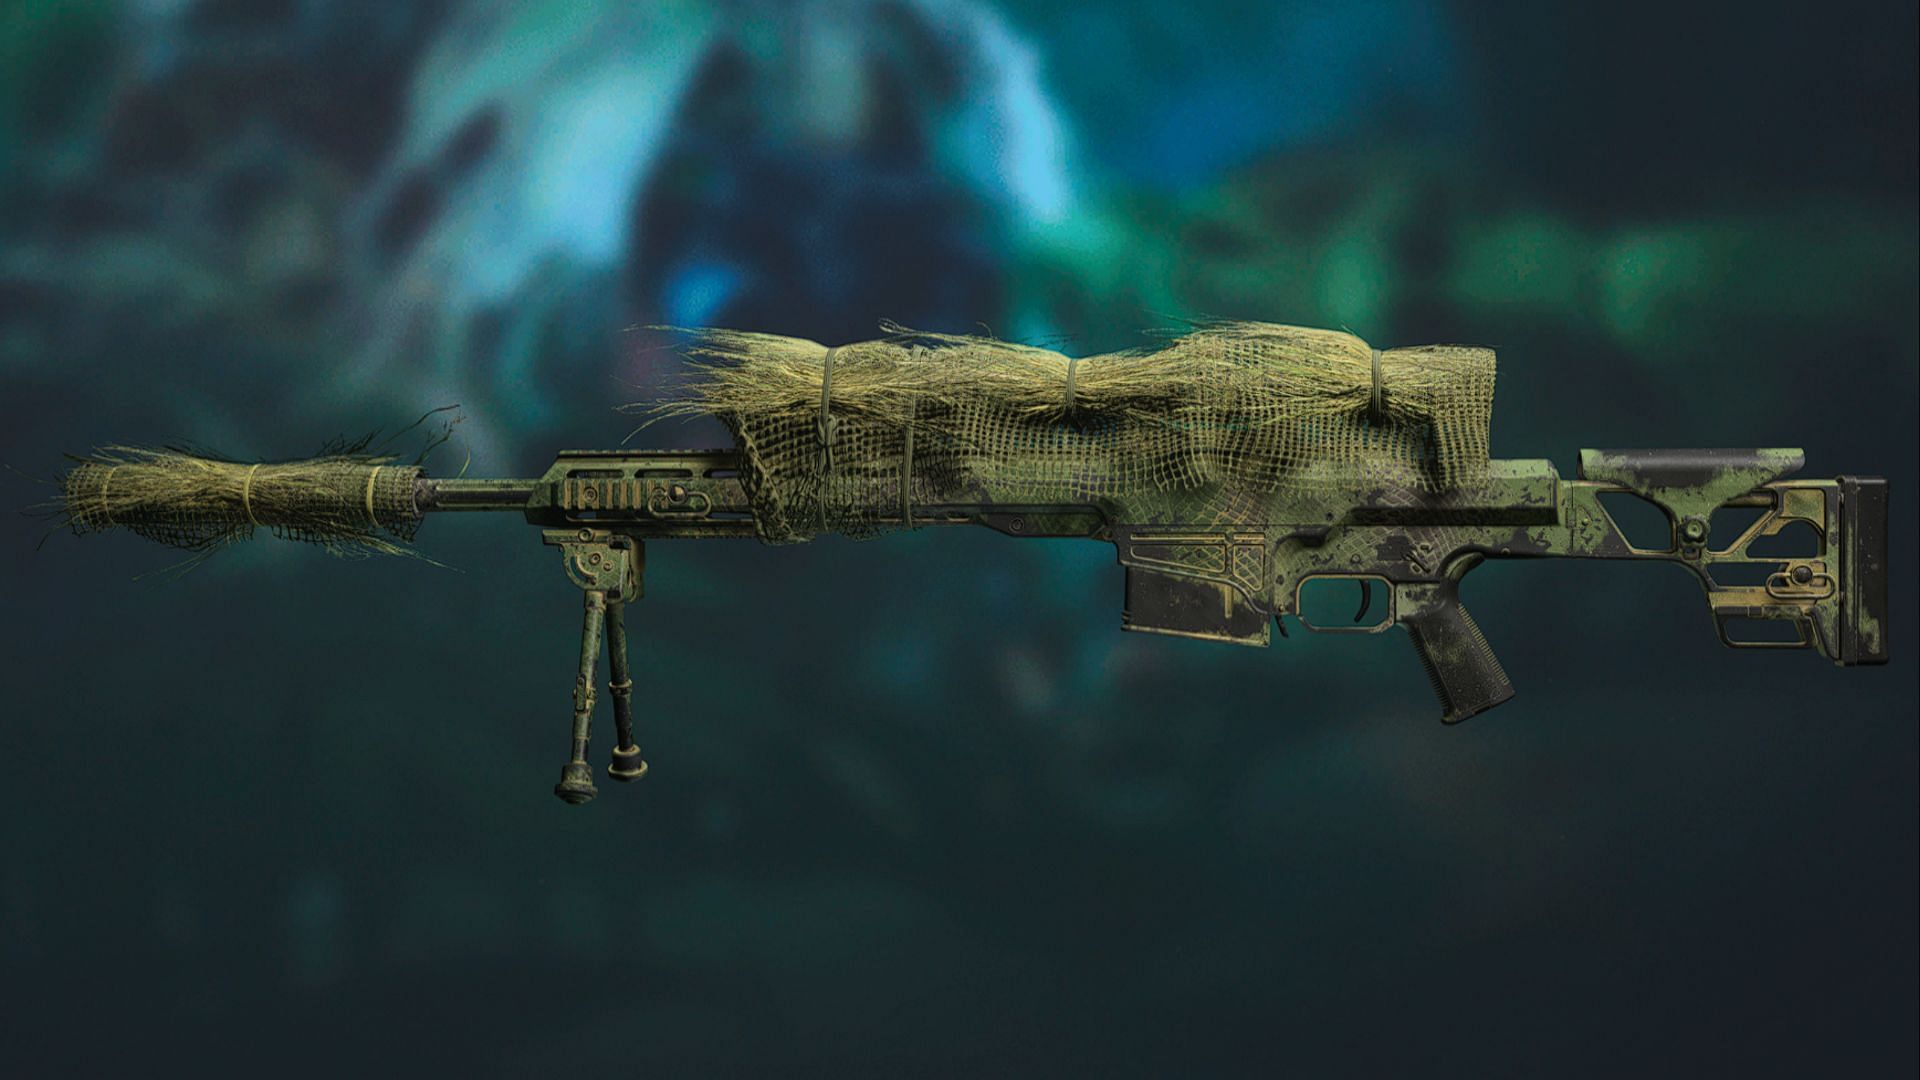 The Sequoia weapon blueprint for the MCPR-300 in Warzone 2 (Image via Activision)